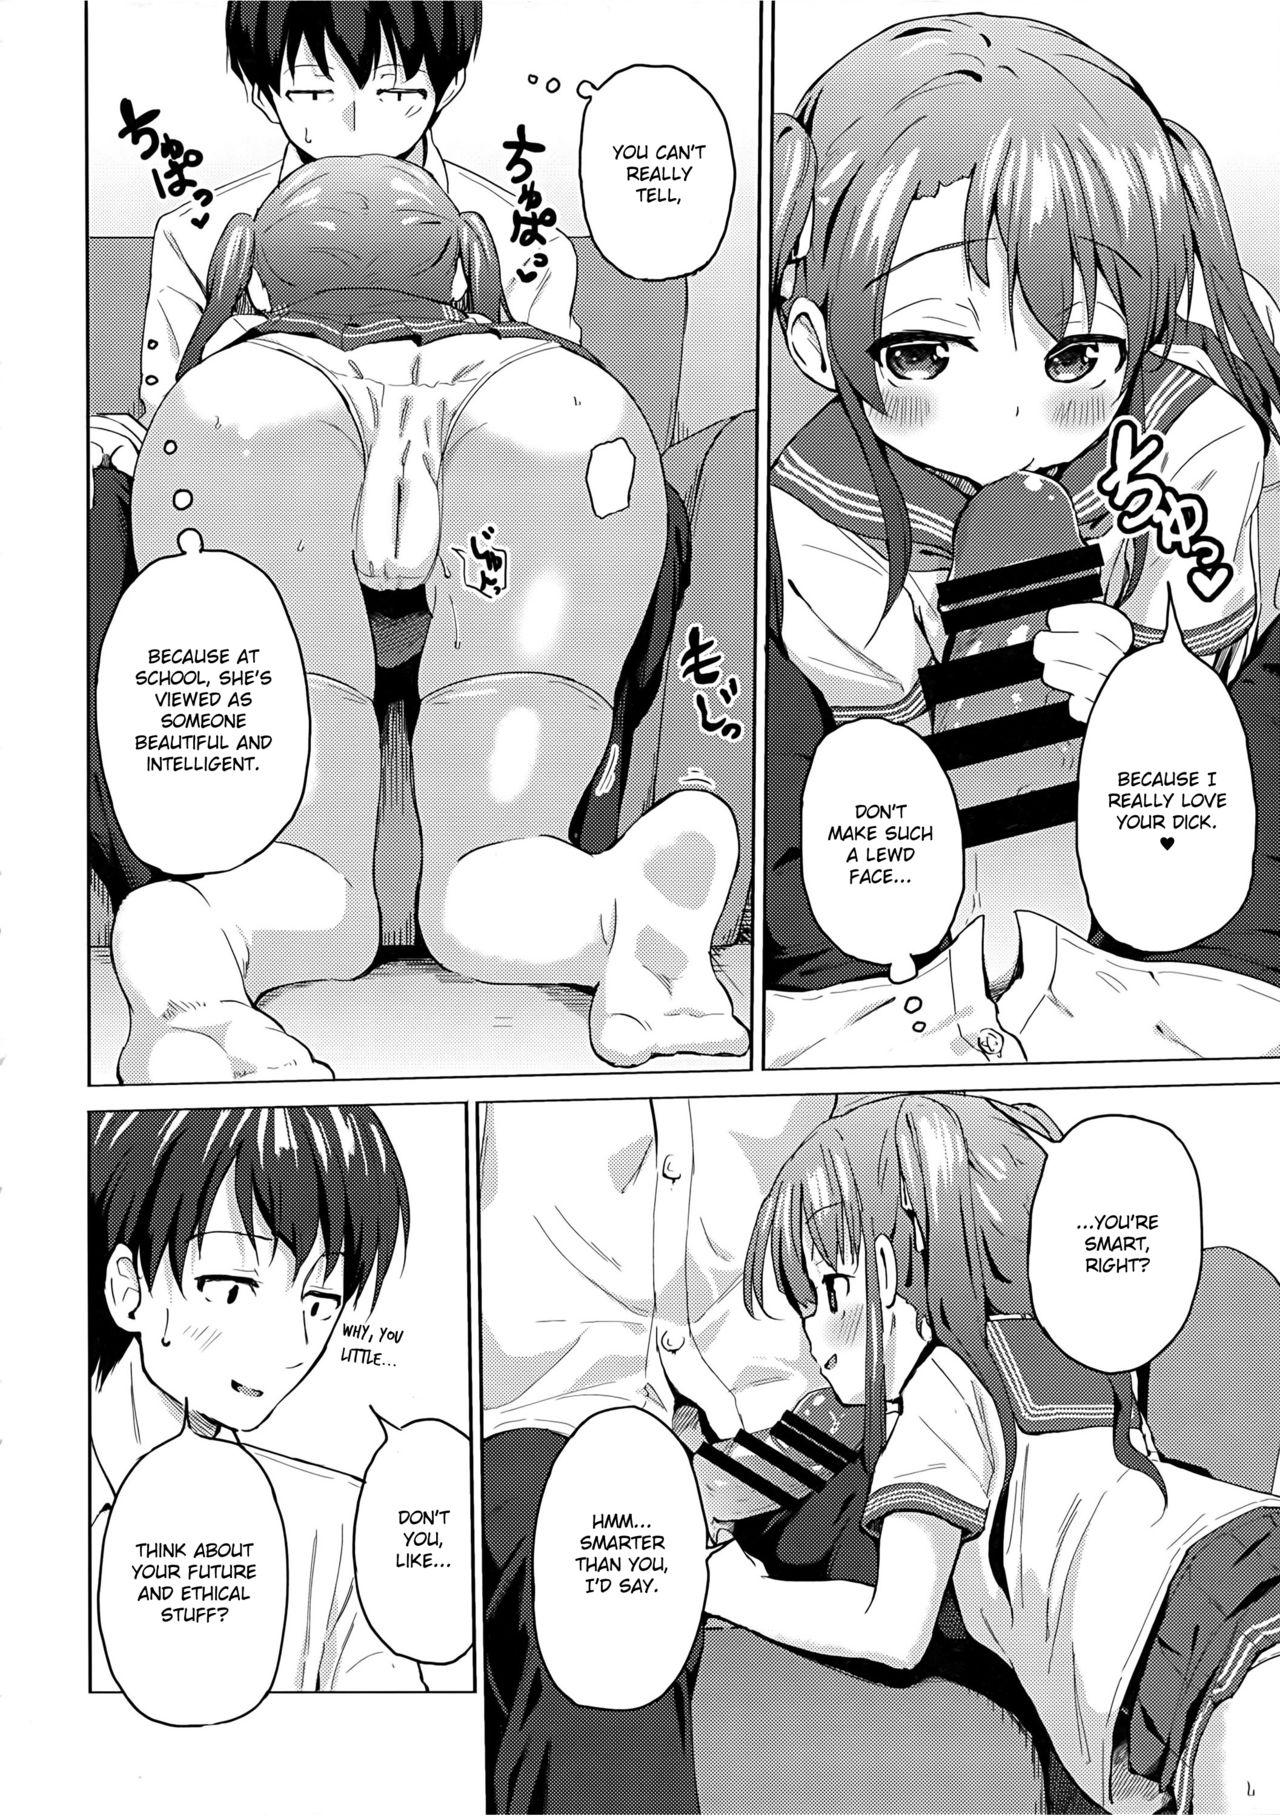 Safadinha Imouto wa Ani Senyou | A Little Sister Is Exclusive Only for Her Big Brother - Original Jacking - Page 7